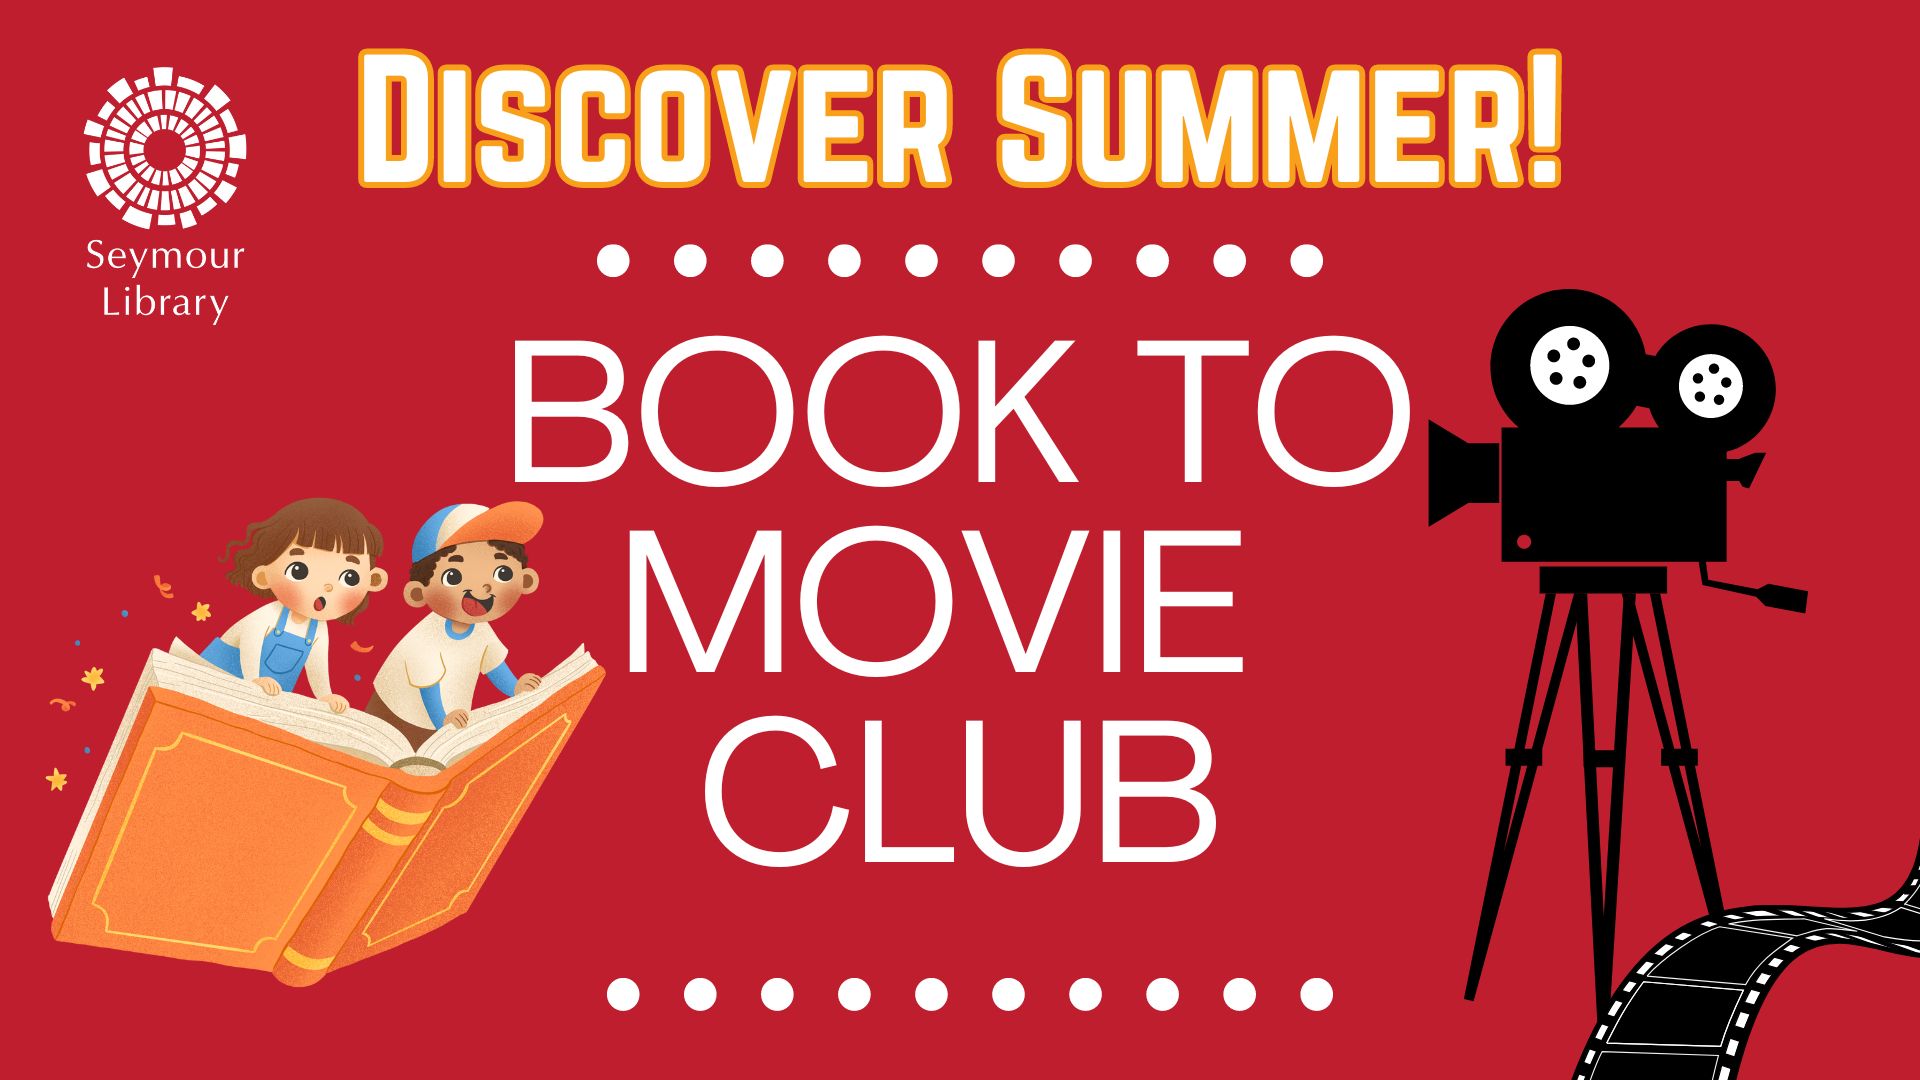 Discover Summer Book to Movie Club